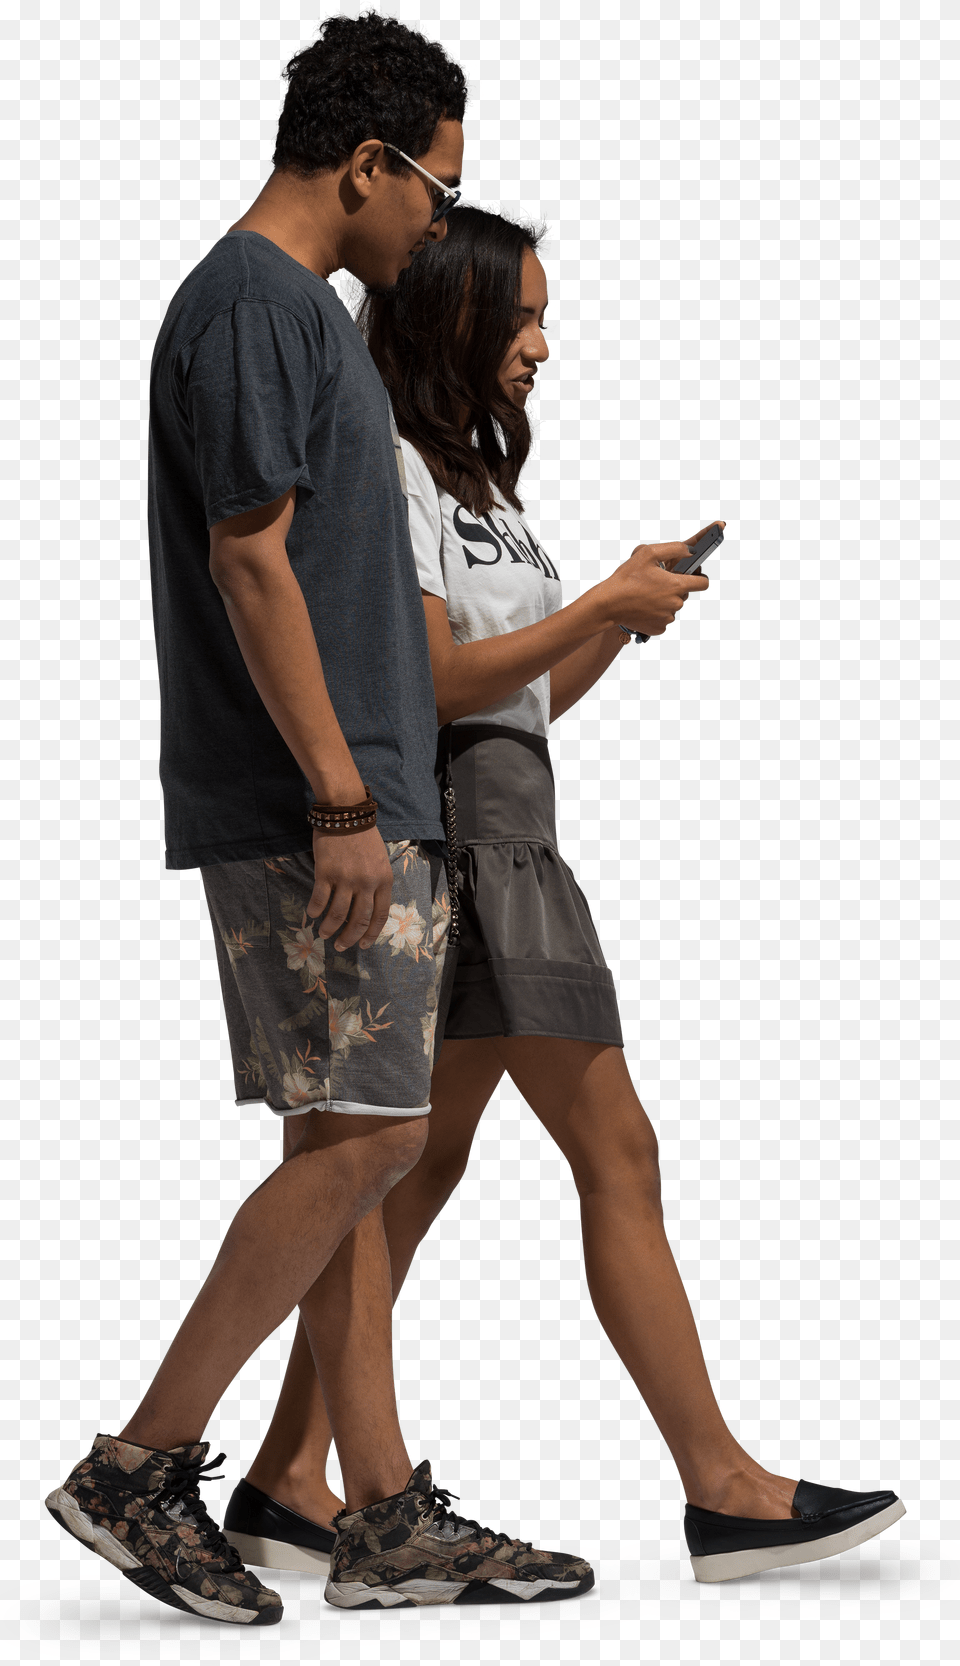 Cut Out People Cutout People Photos People Cut Out Png Image